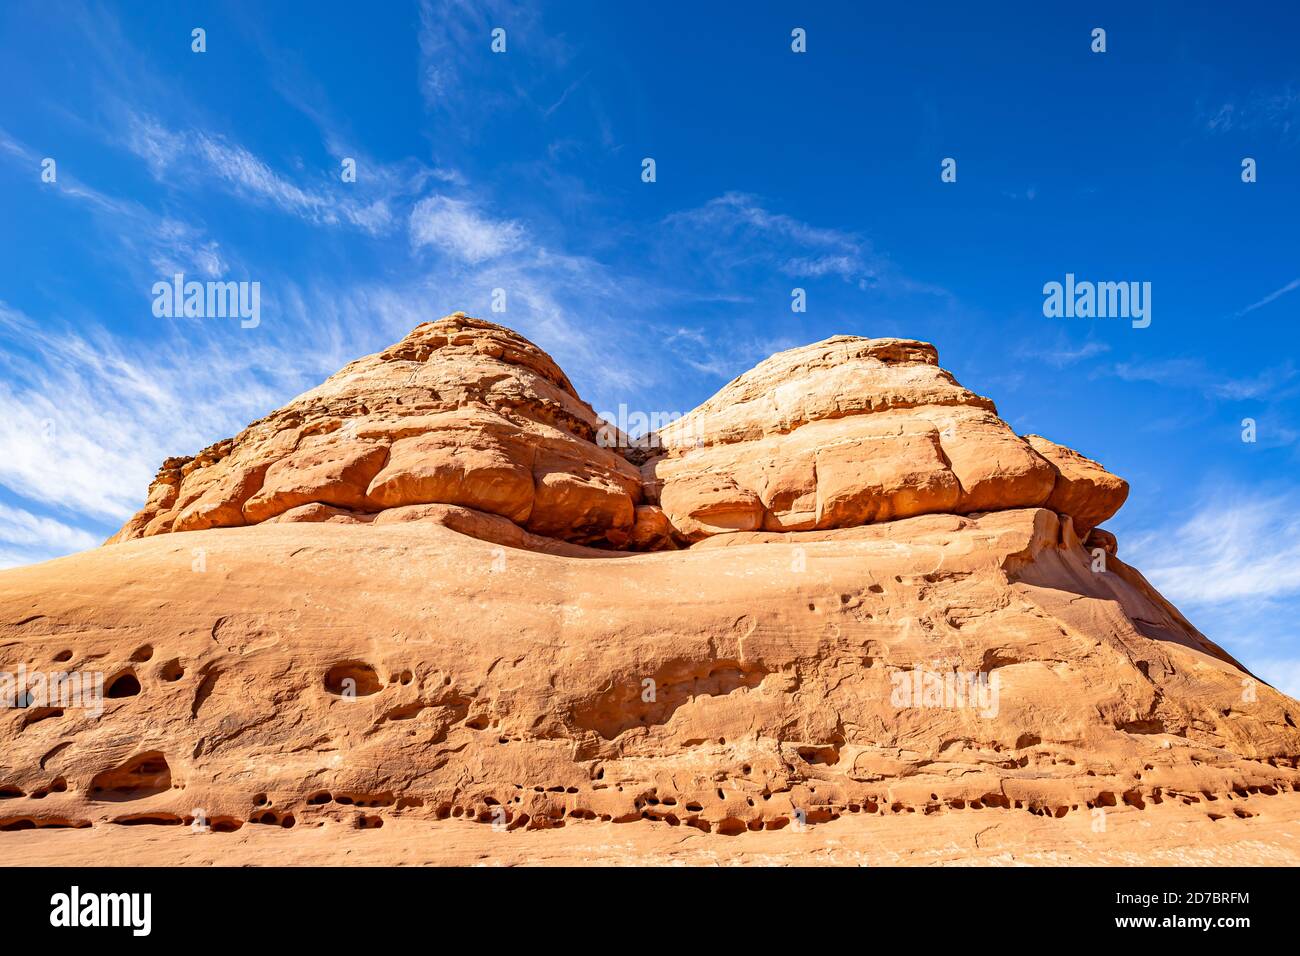 Scenic mushroom shaped rock formation along the trail to Delicate Arch at Arches National Park, Utah Stock Photo